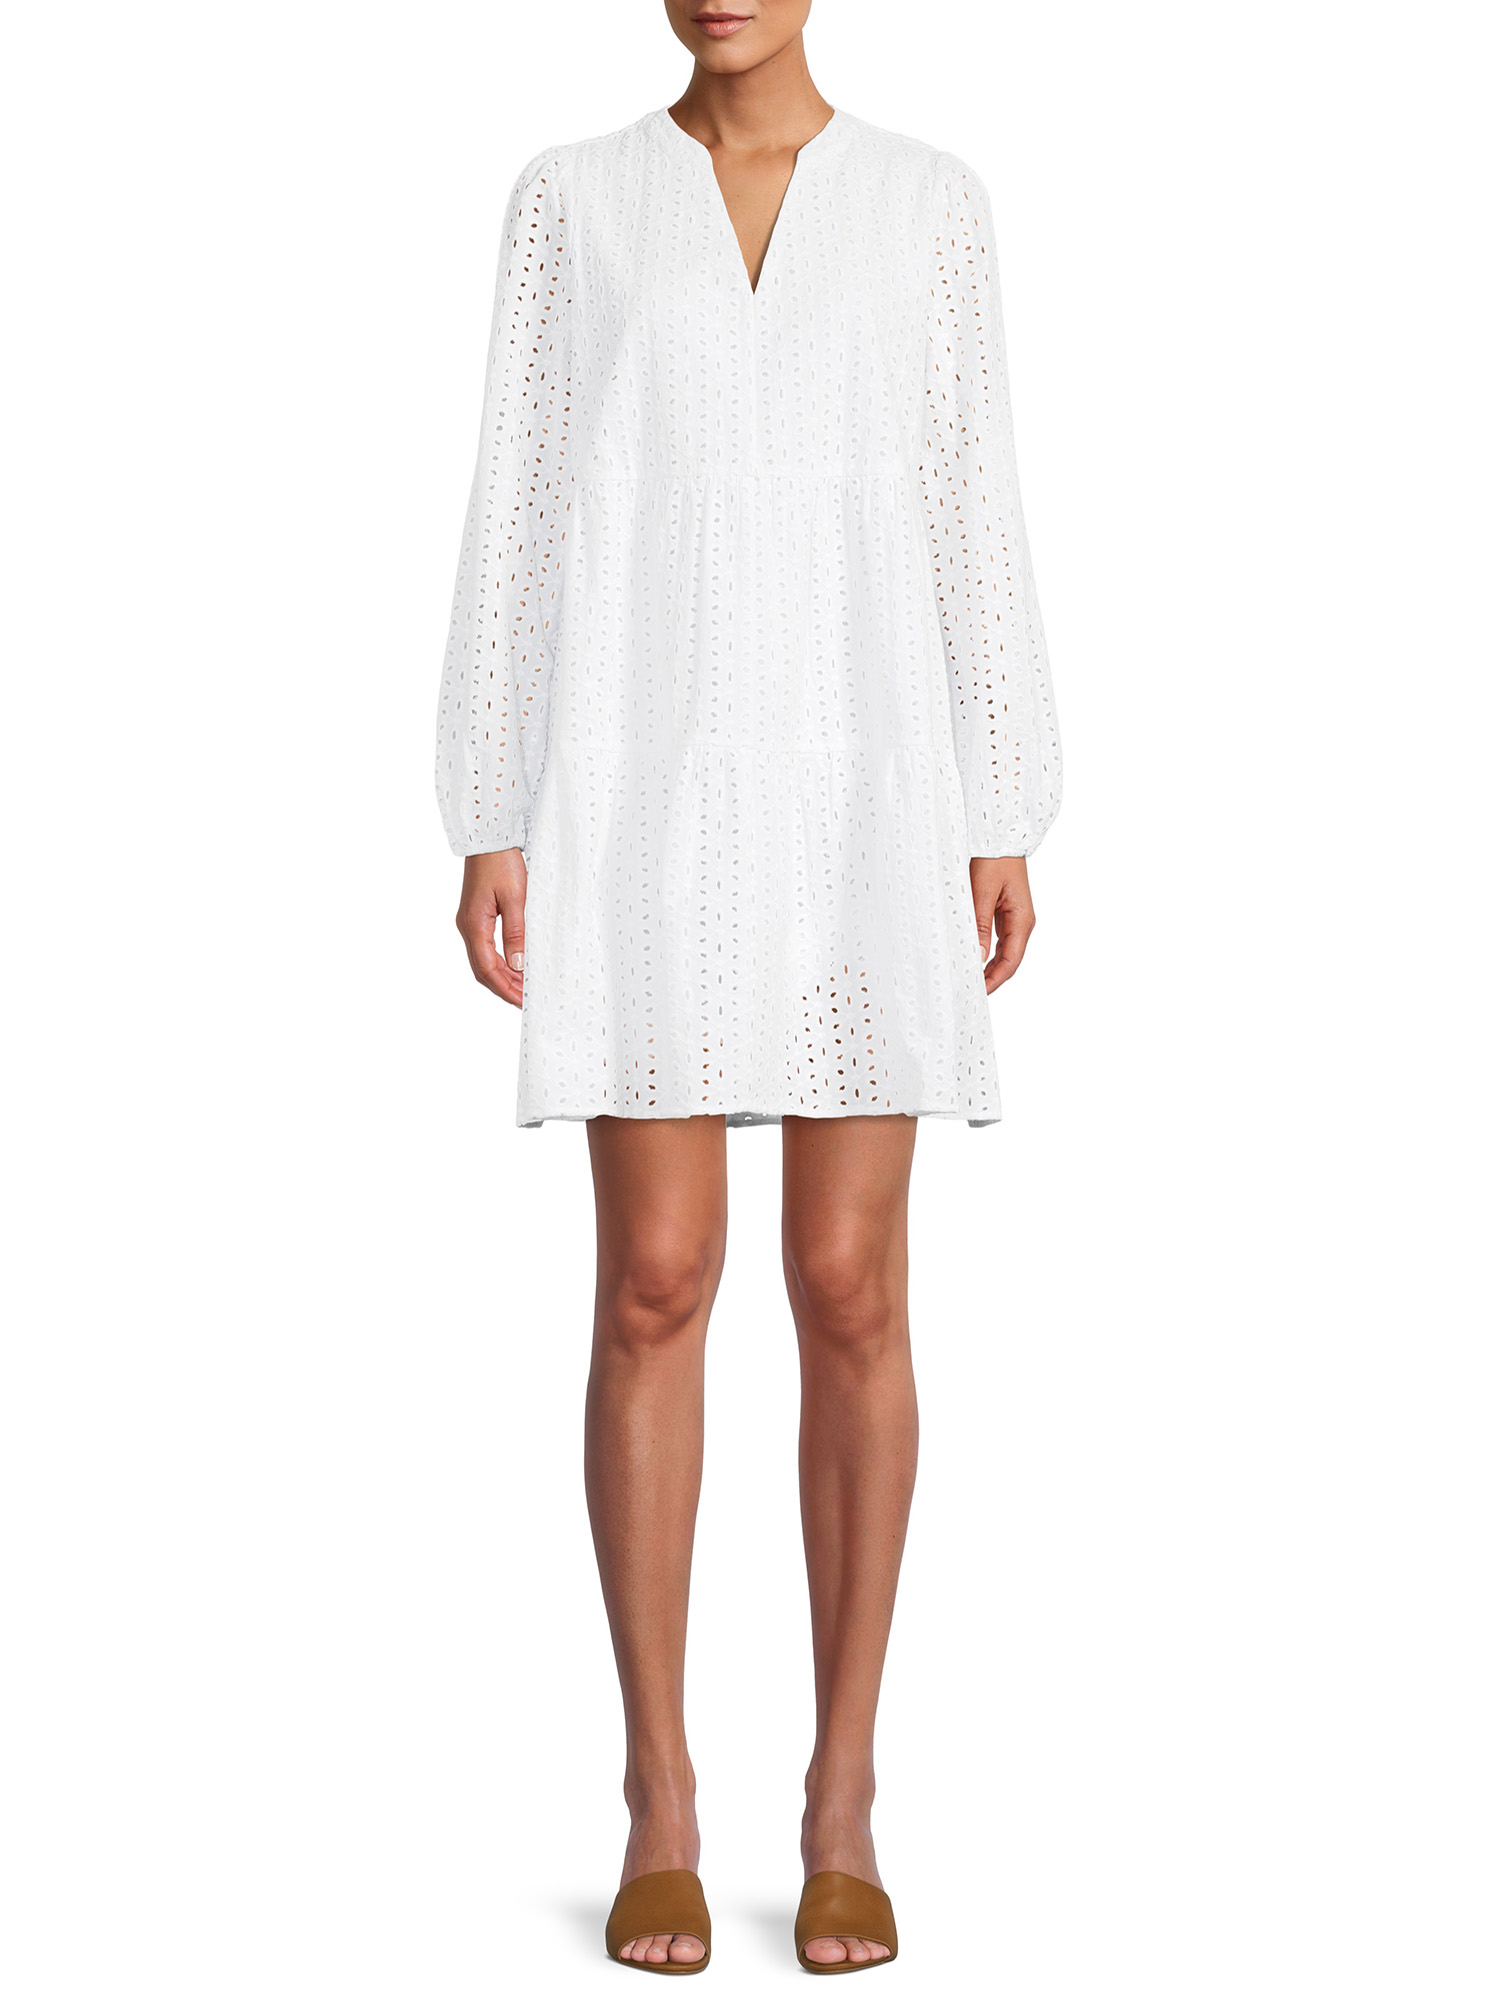 Time and Tru Women's Long Sleeve Solid and Eyelet Dress - image 5 of 5